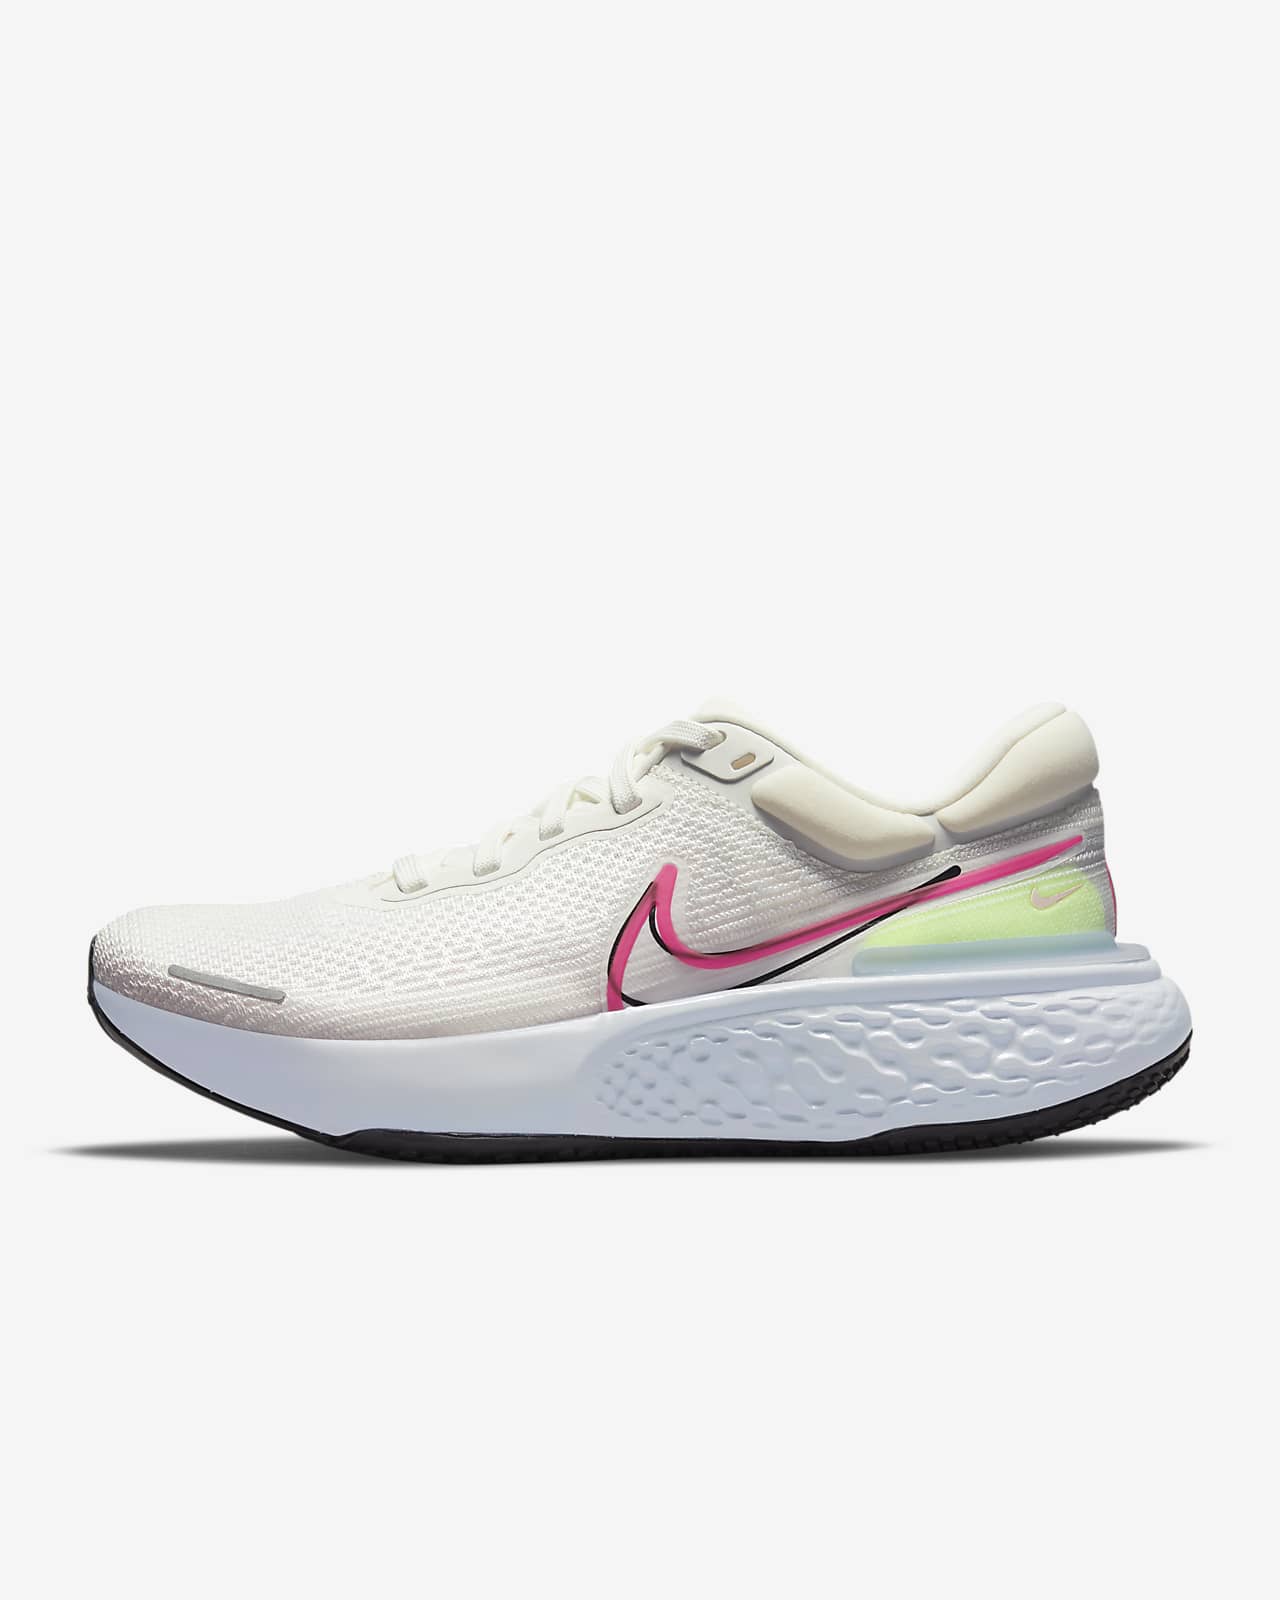 nike zoomx shoes price in india